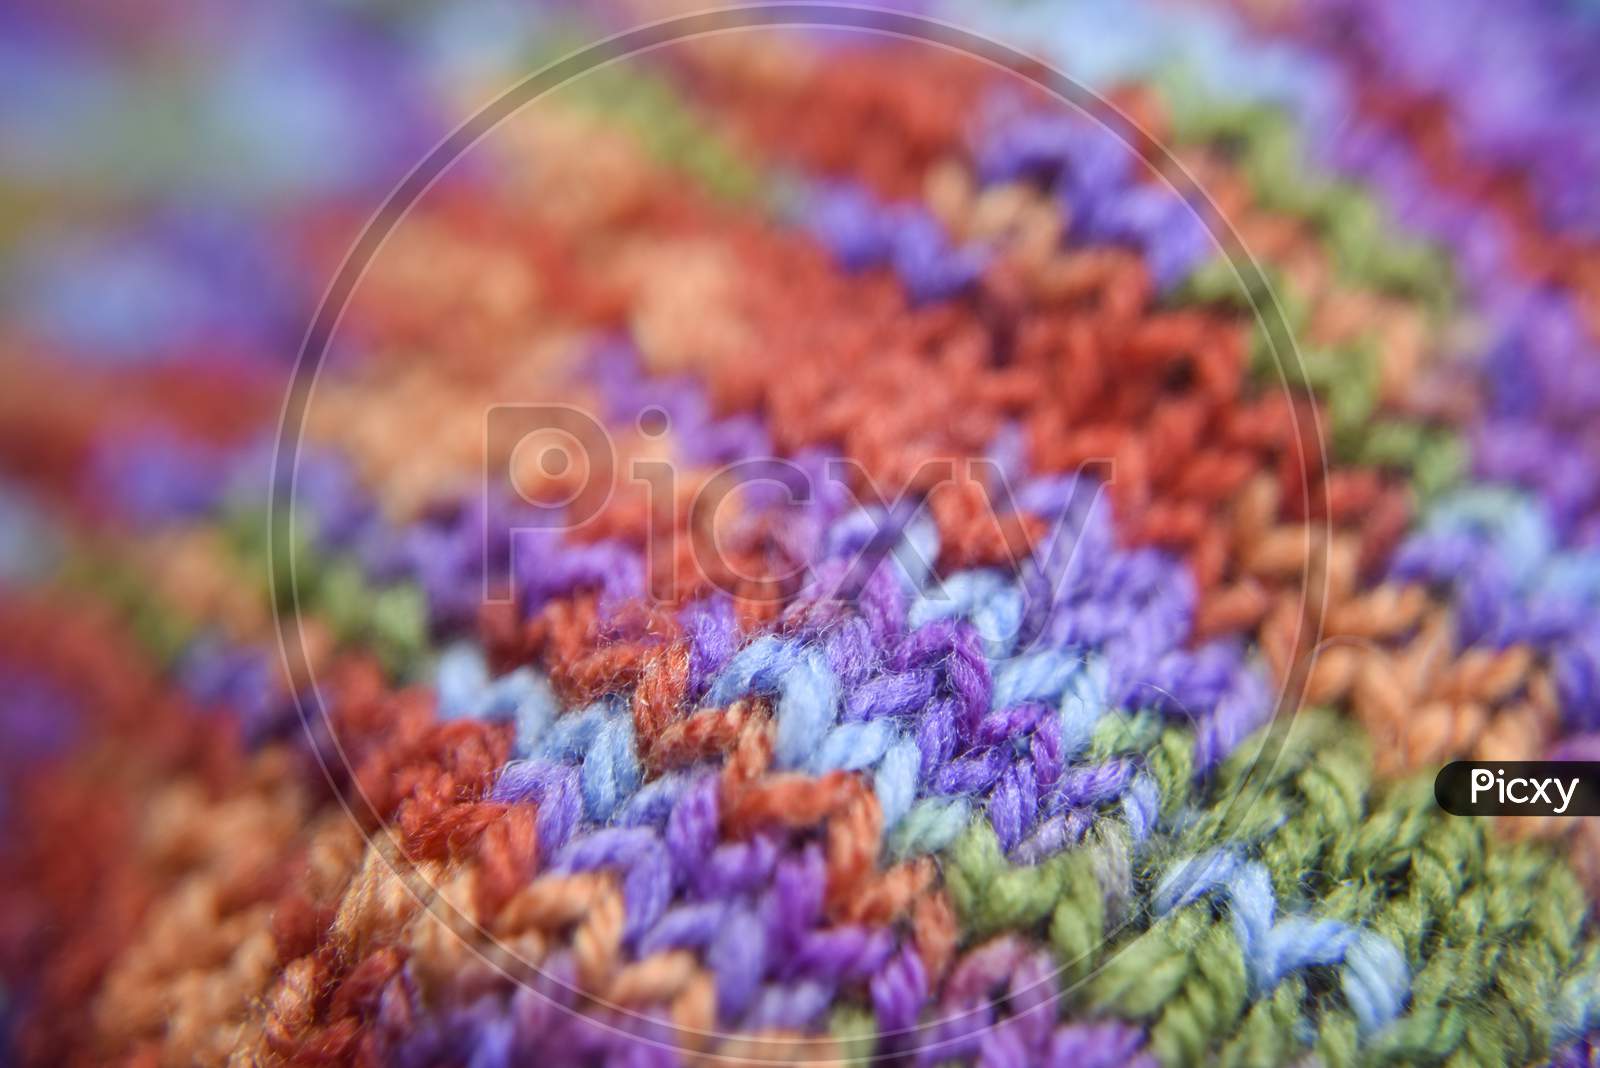 Selective Focus At The Bright Colorful Knitted Pattern Close-Up Look. Natural Wool Of Red, Orange, Green, Blue, Purple Colors.